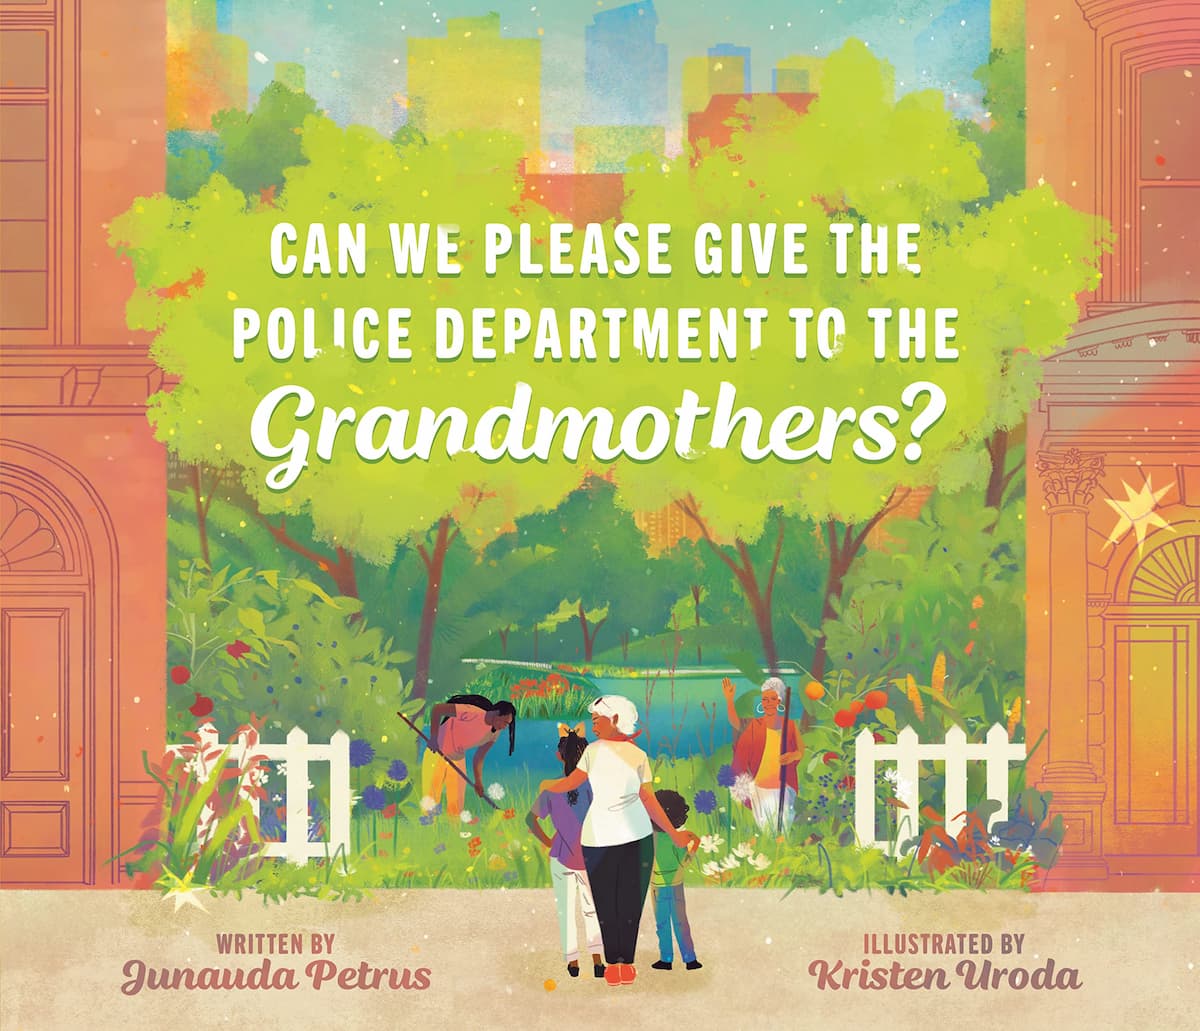 Can we please leave the policing to grandmothers?